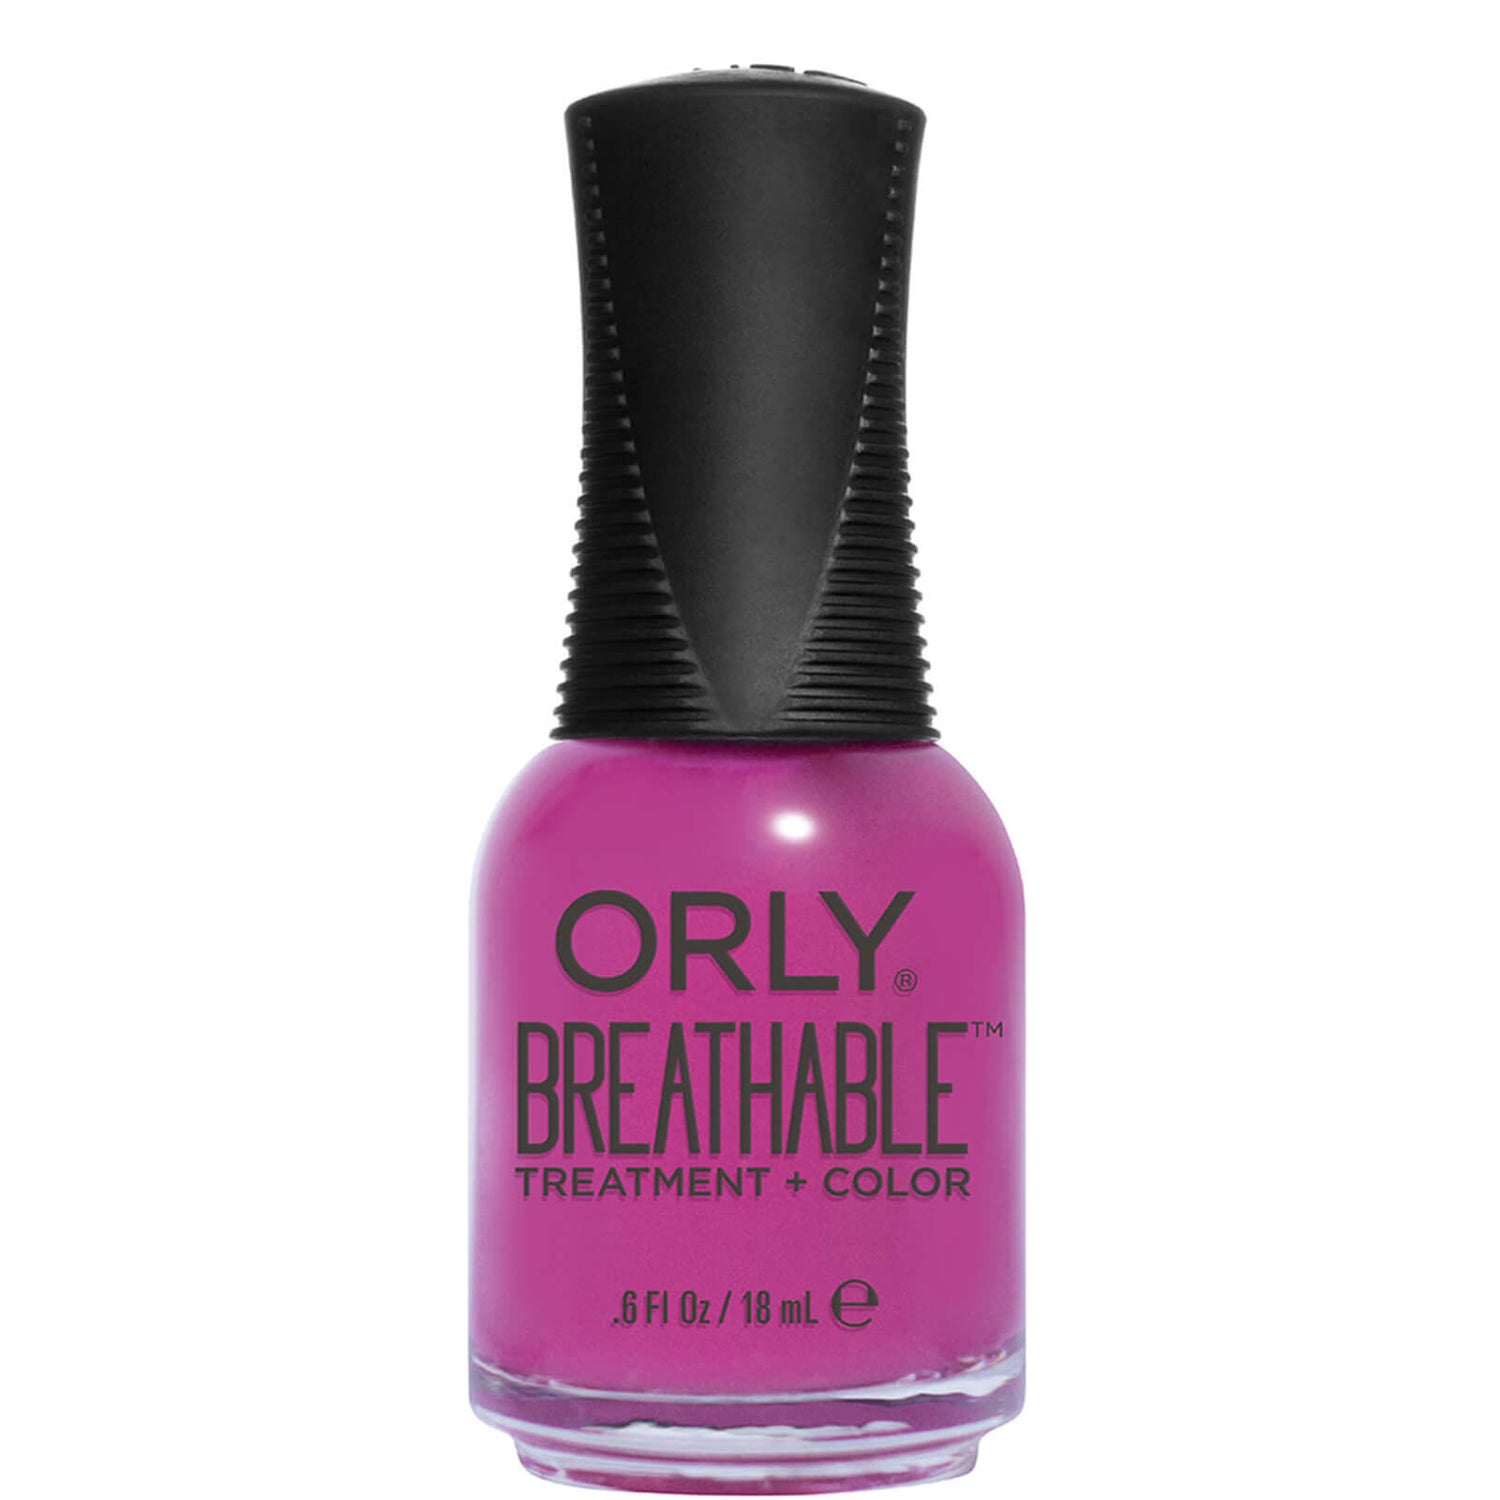 Vernis à Ongles Breathable Soin + Couleur Give Me a Break ORLY 18 ml